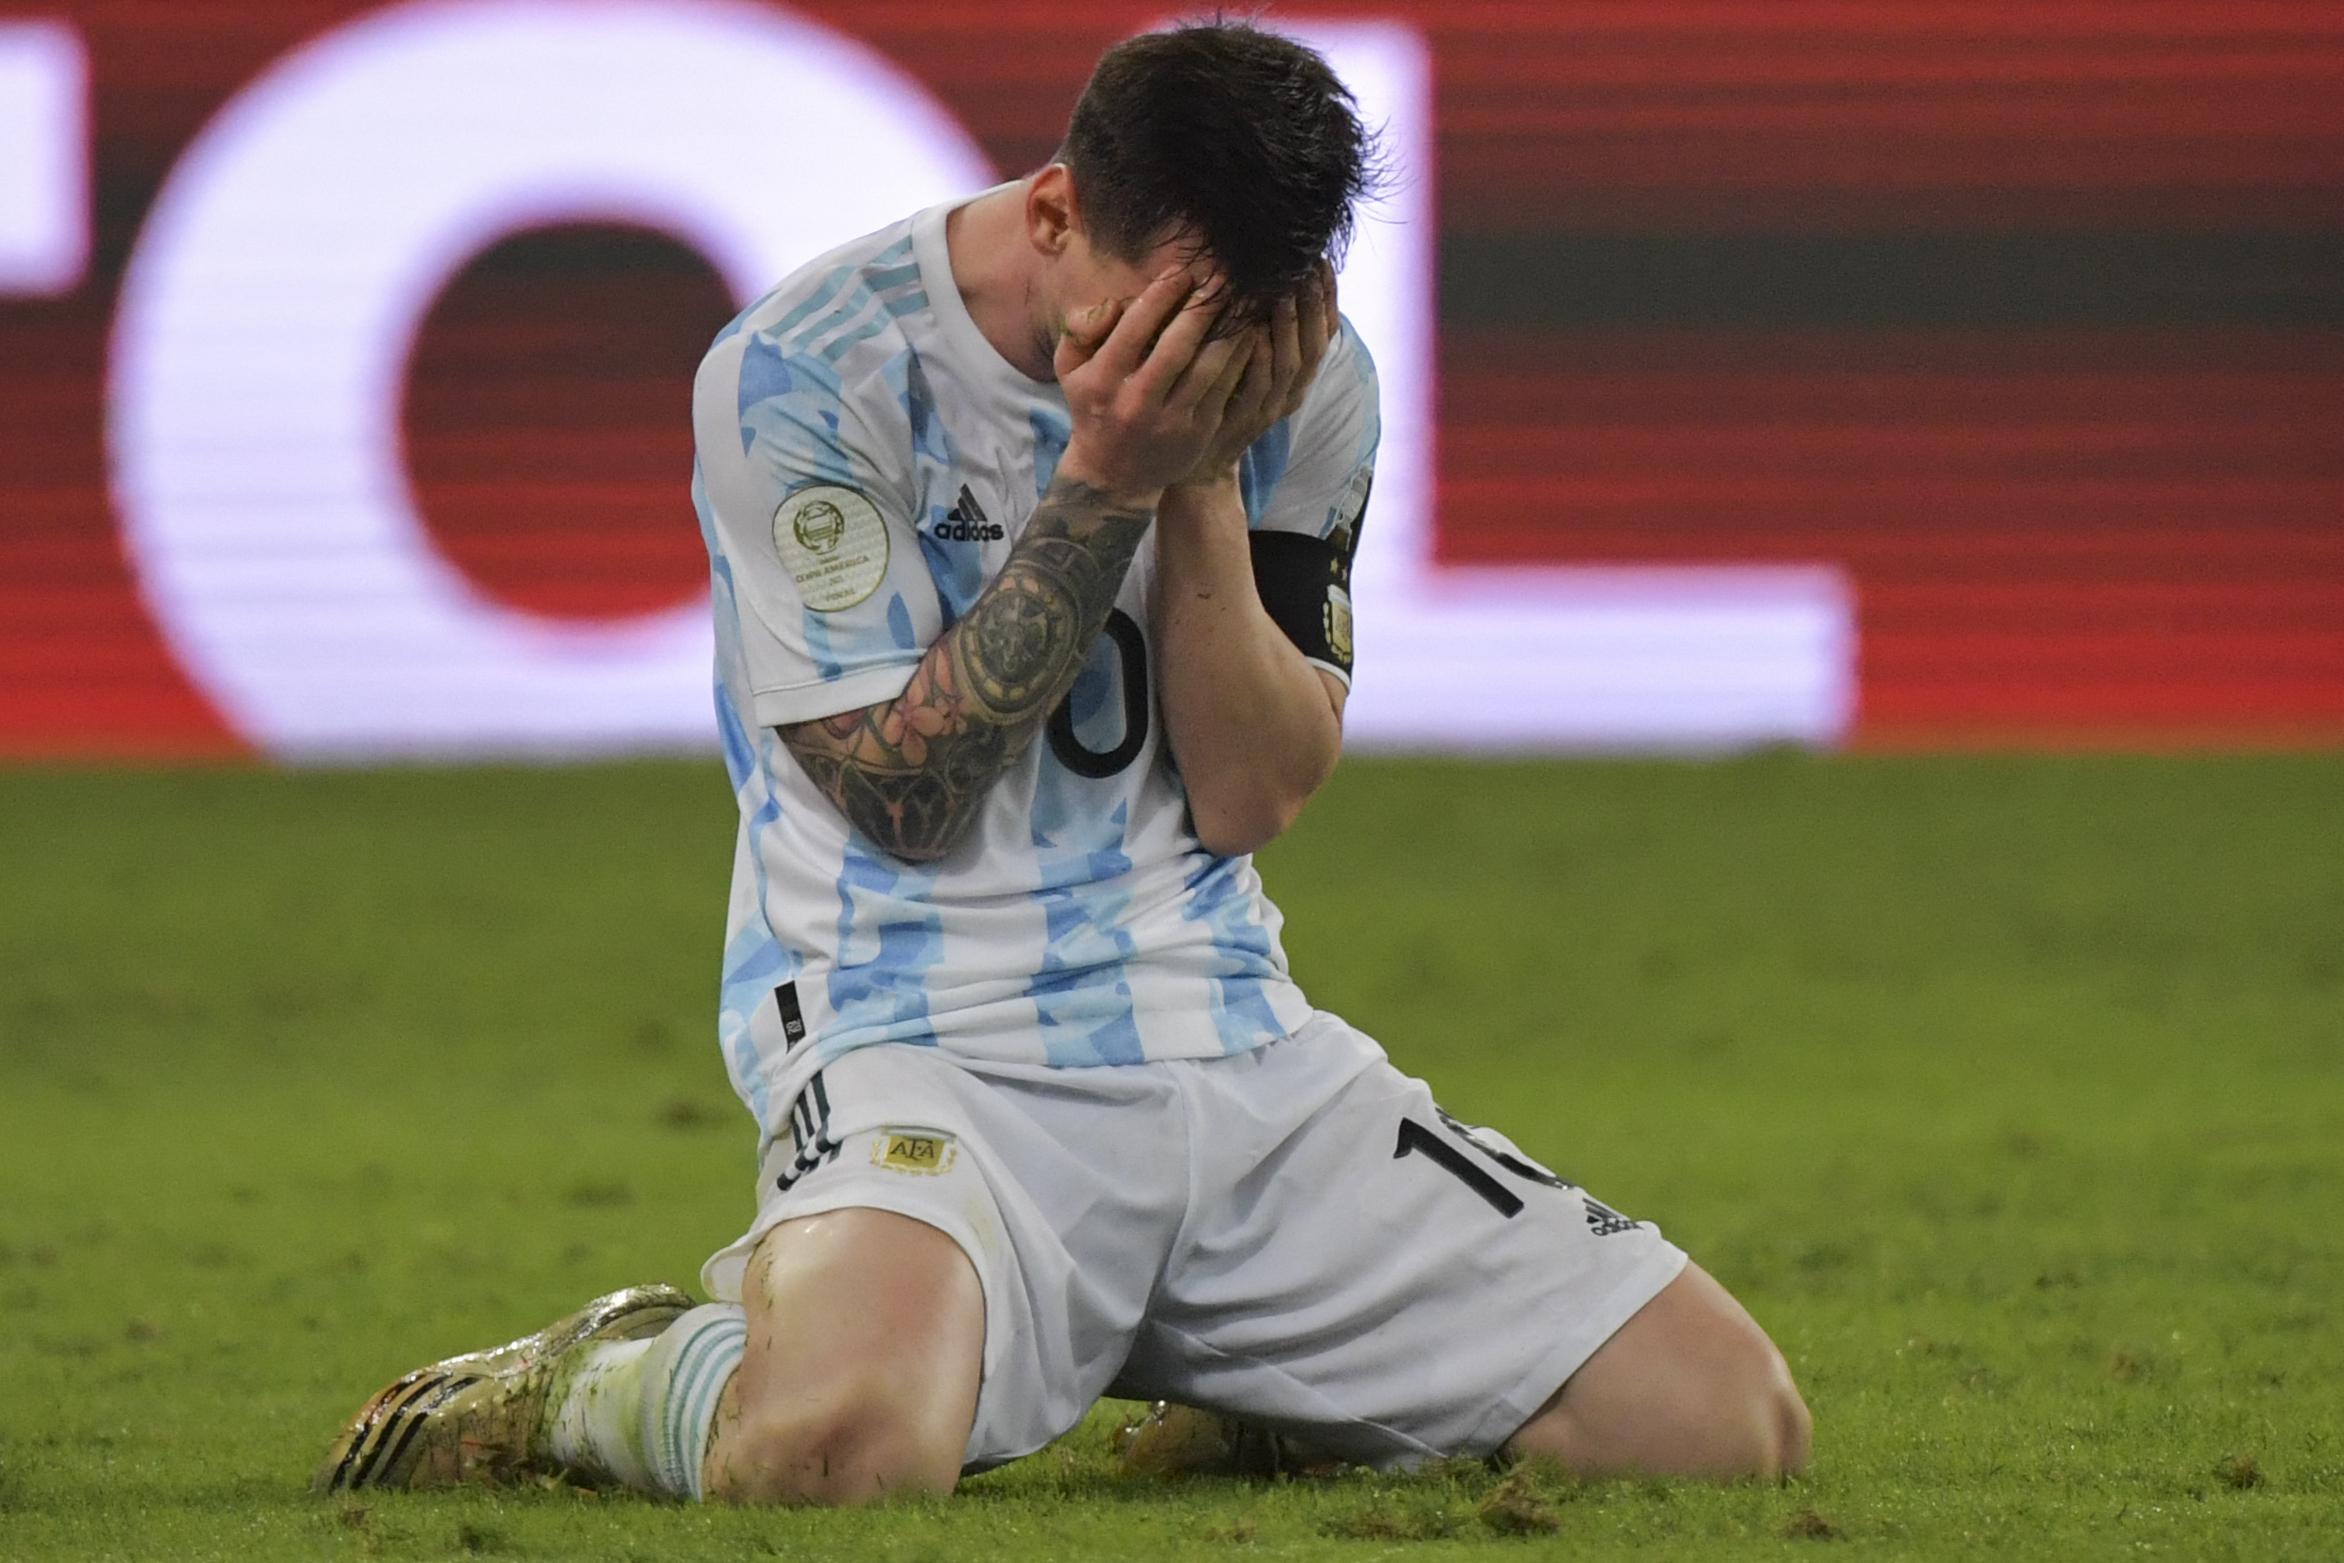 Argentina's Lionel Messi reacts in celebration after winning the Conmebol 2021 Copa America football tournament final match against Brazil at Maracana Stadium in Rio de Janeiro, Brazil, on July 10, 2021.